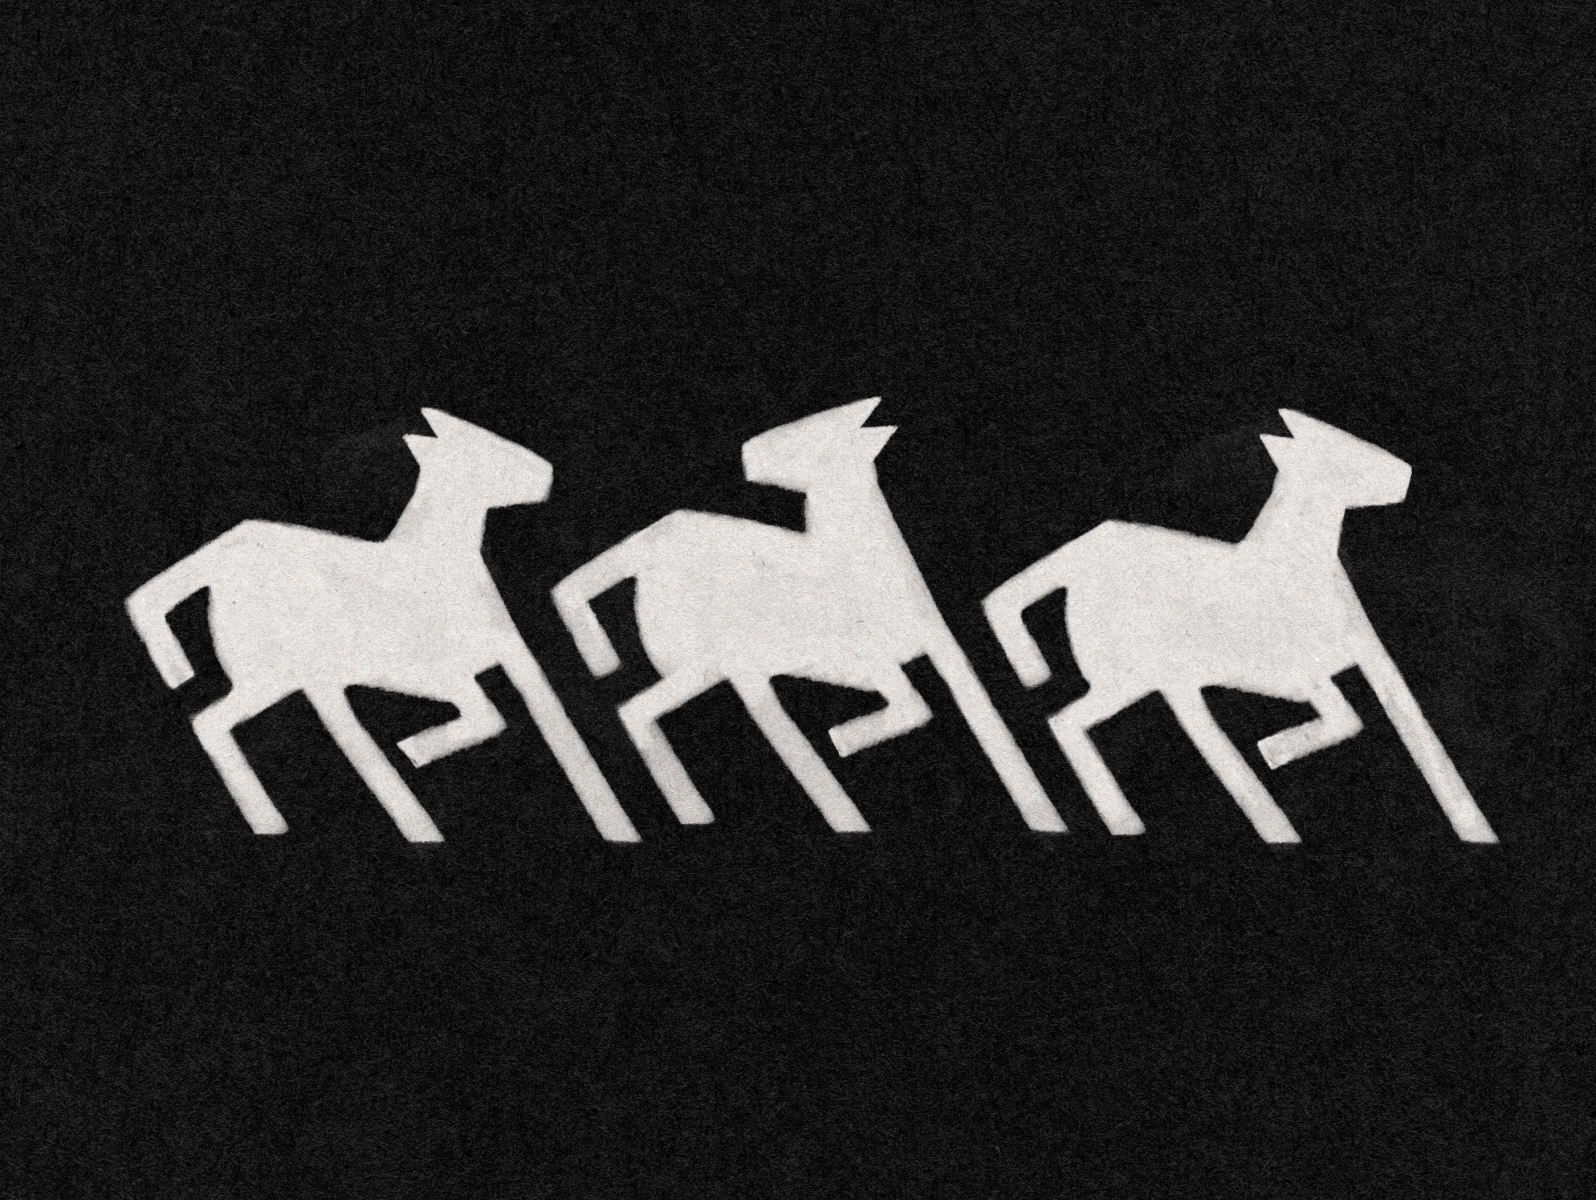 Three White Horses by James Coffman on Dribbble